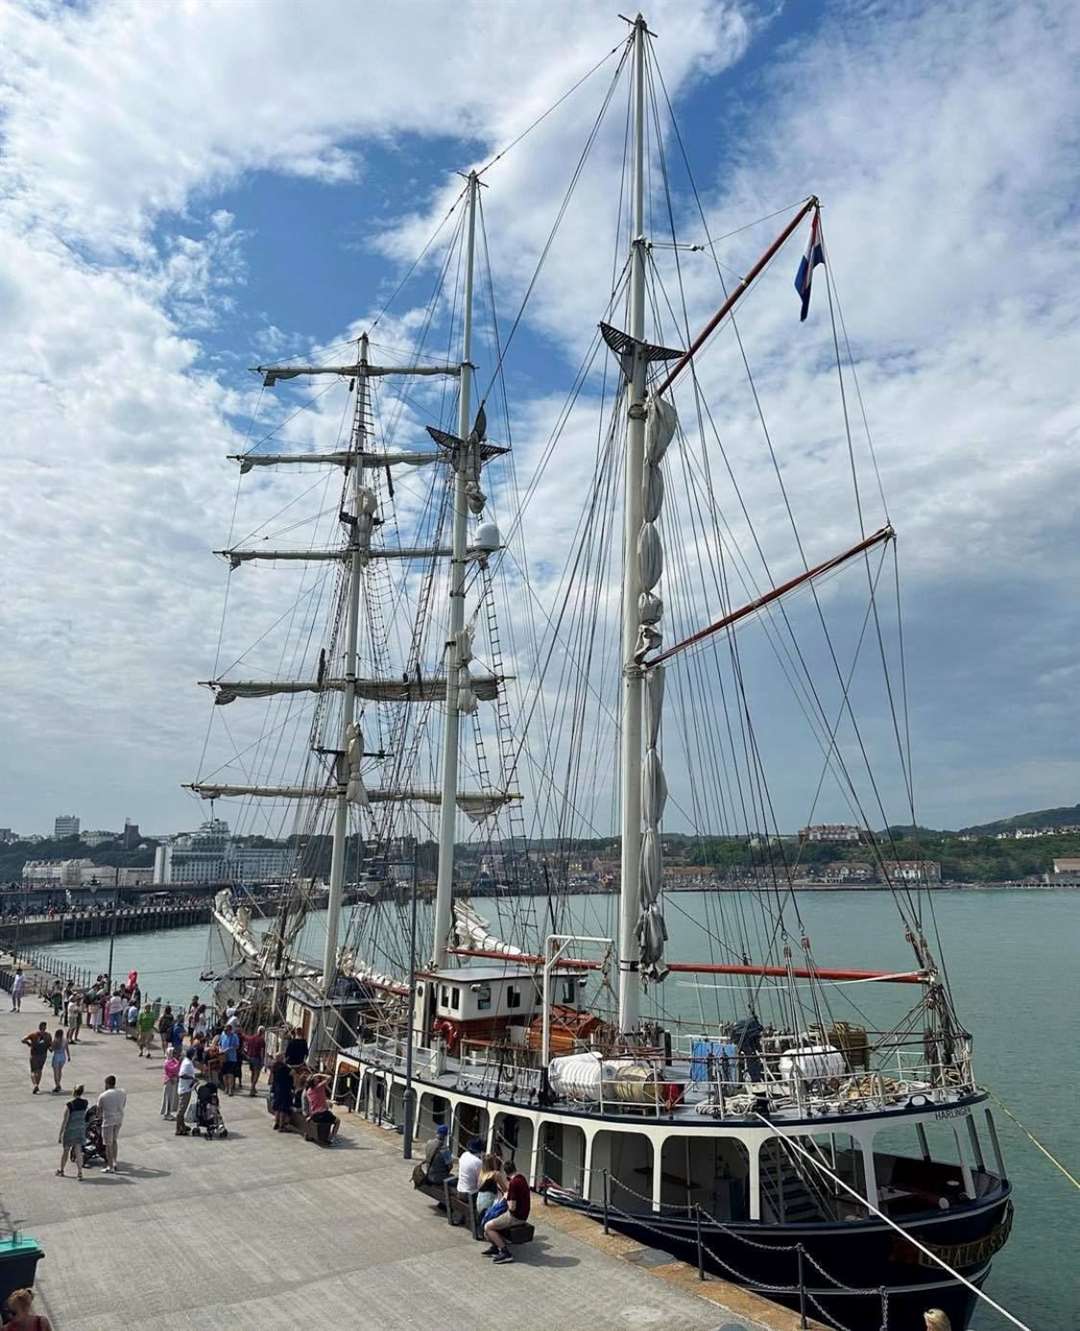 The ship will remain docked until 2.30pm tomorrow when the crew will begin their five-day voyage to Boulogne. Picture: Folkestone Harbour ArmPicture: Folkestone Harbour Arm